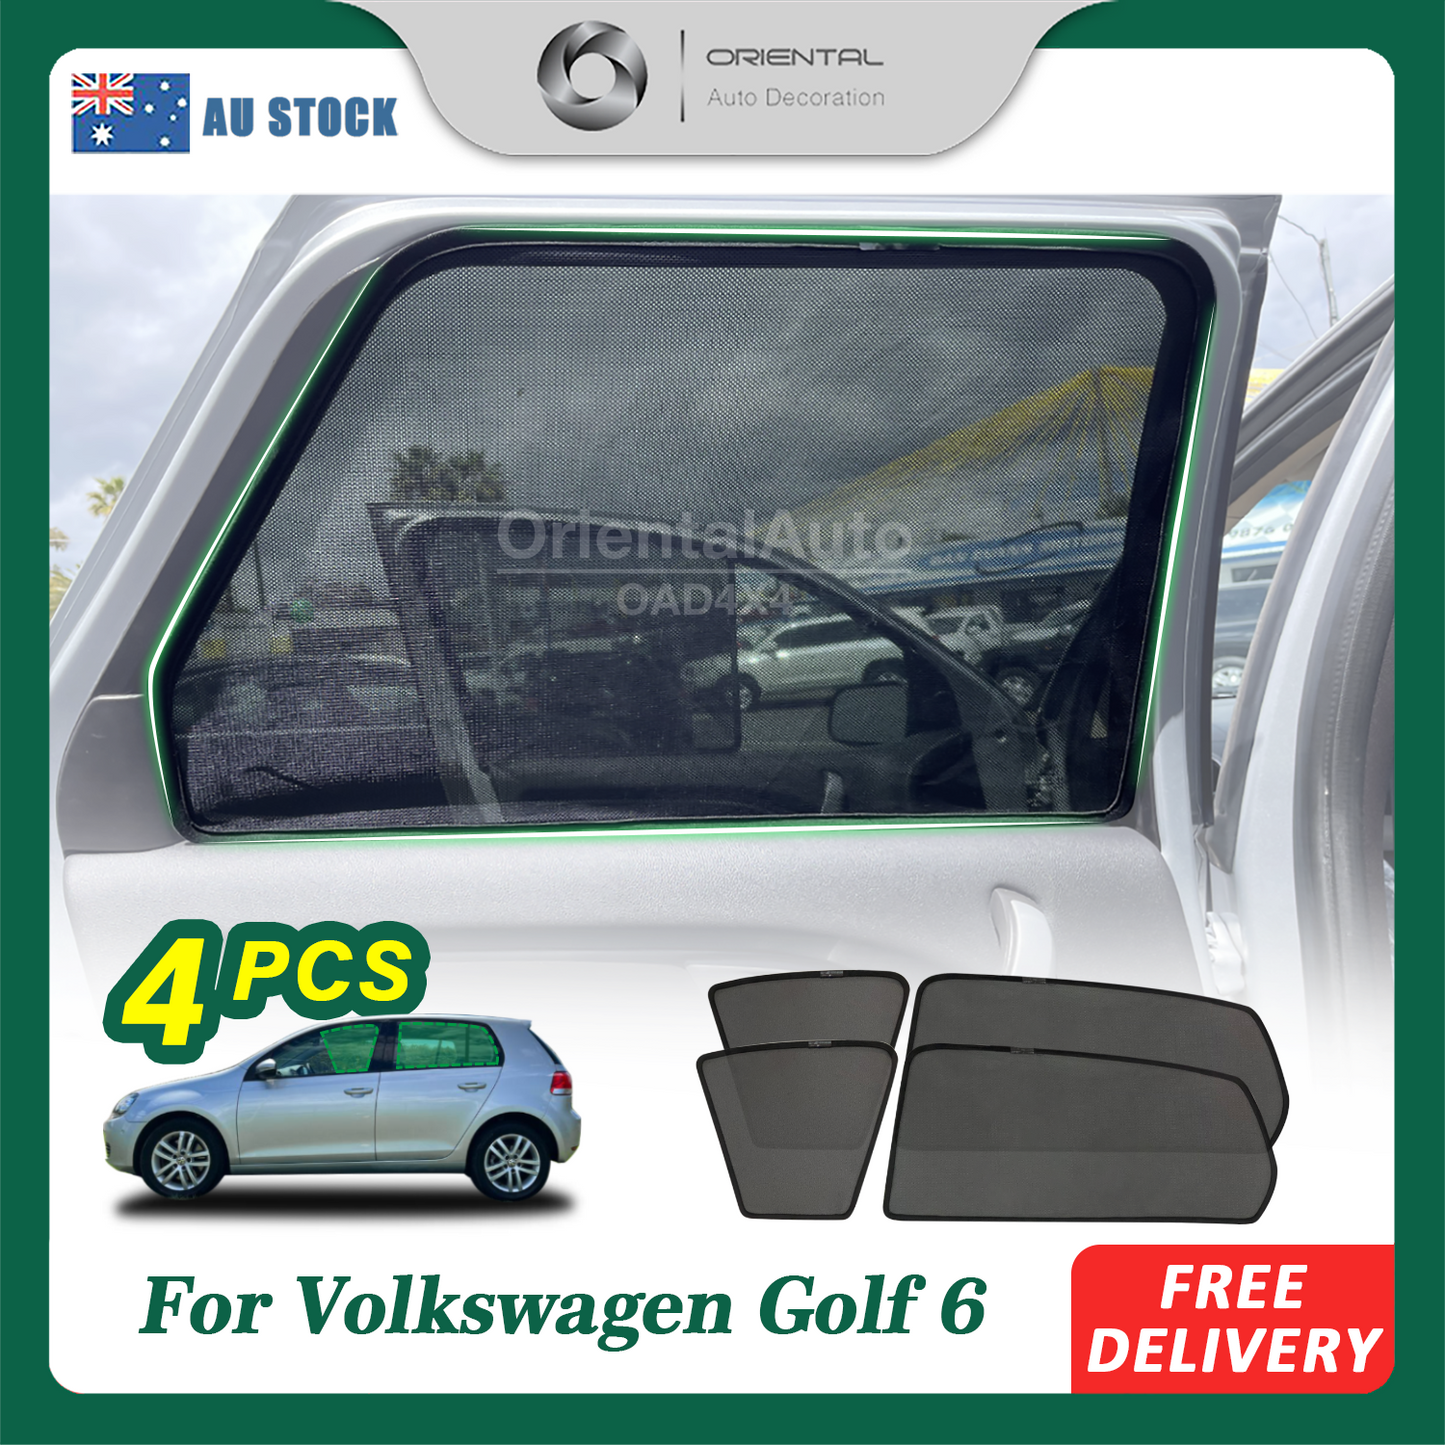 4PCS Magnetic Sun Shade for Volkswagen Golf 6th Gen MK6 2009-2013 Window Sun Shades UV Protection Mesh Cover